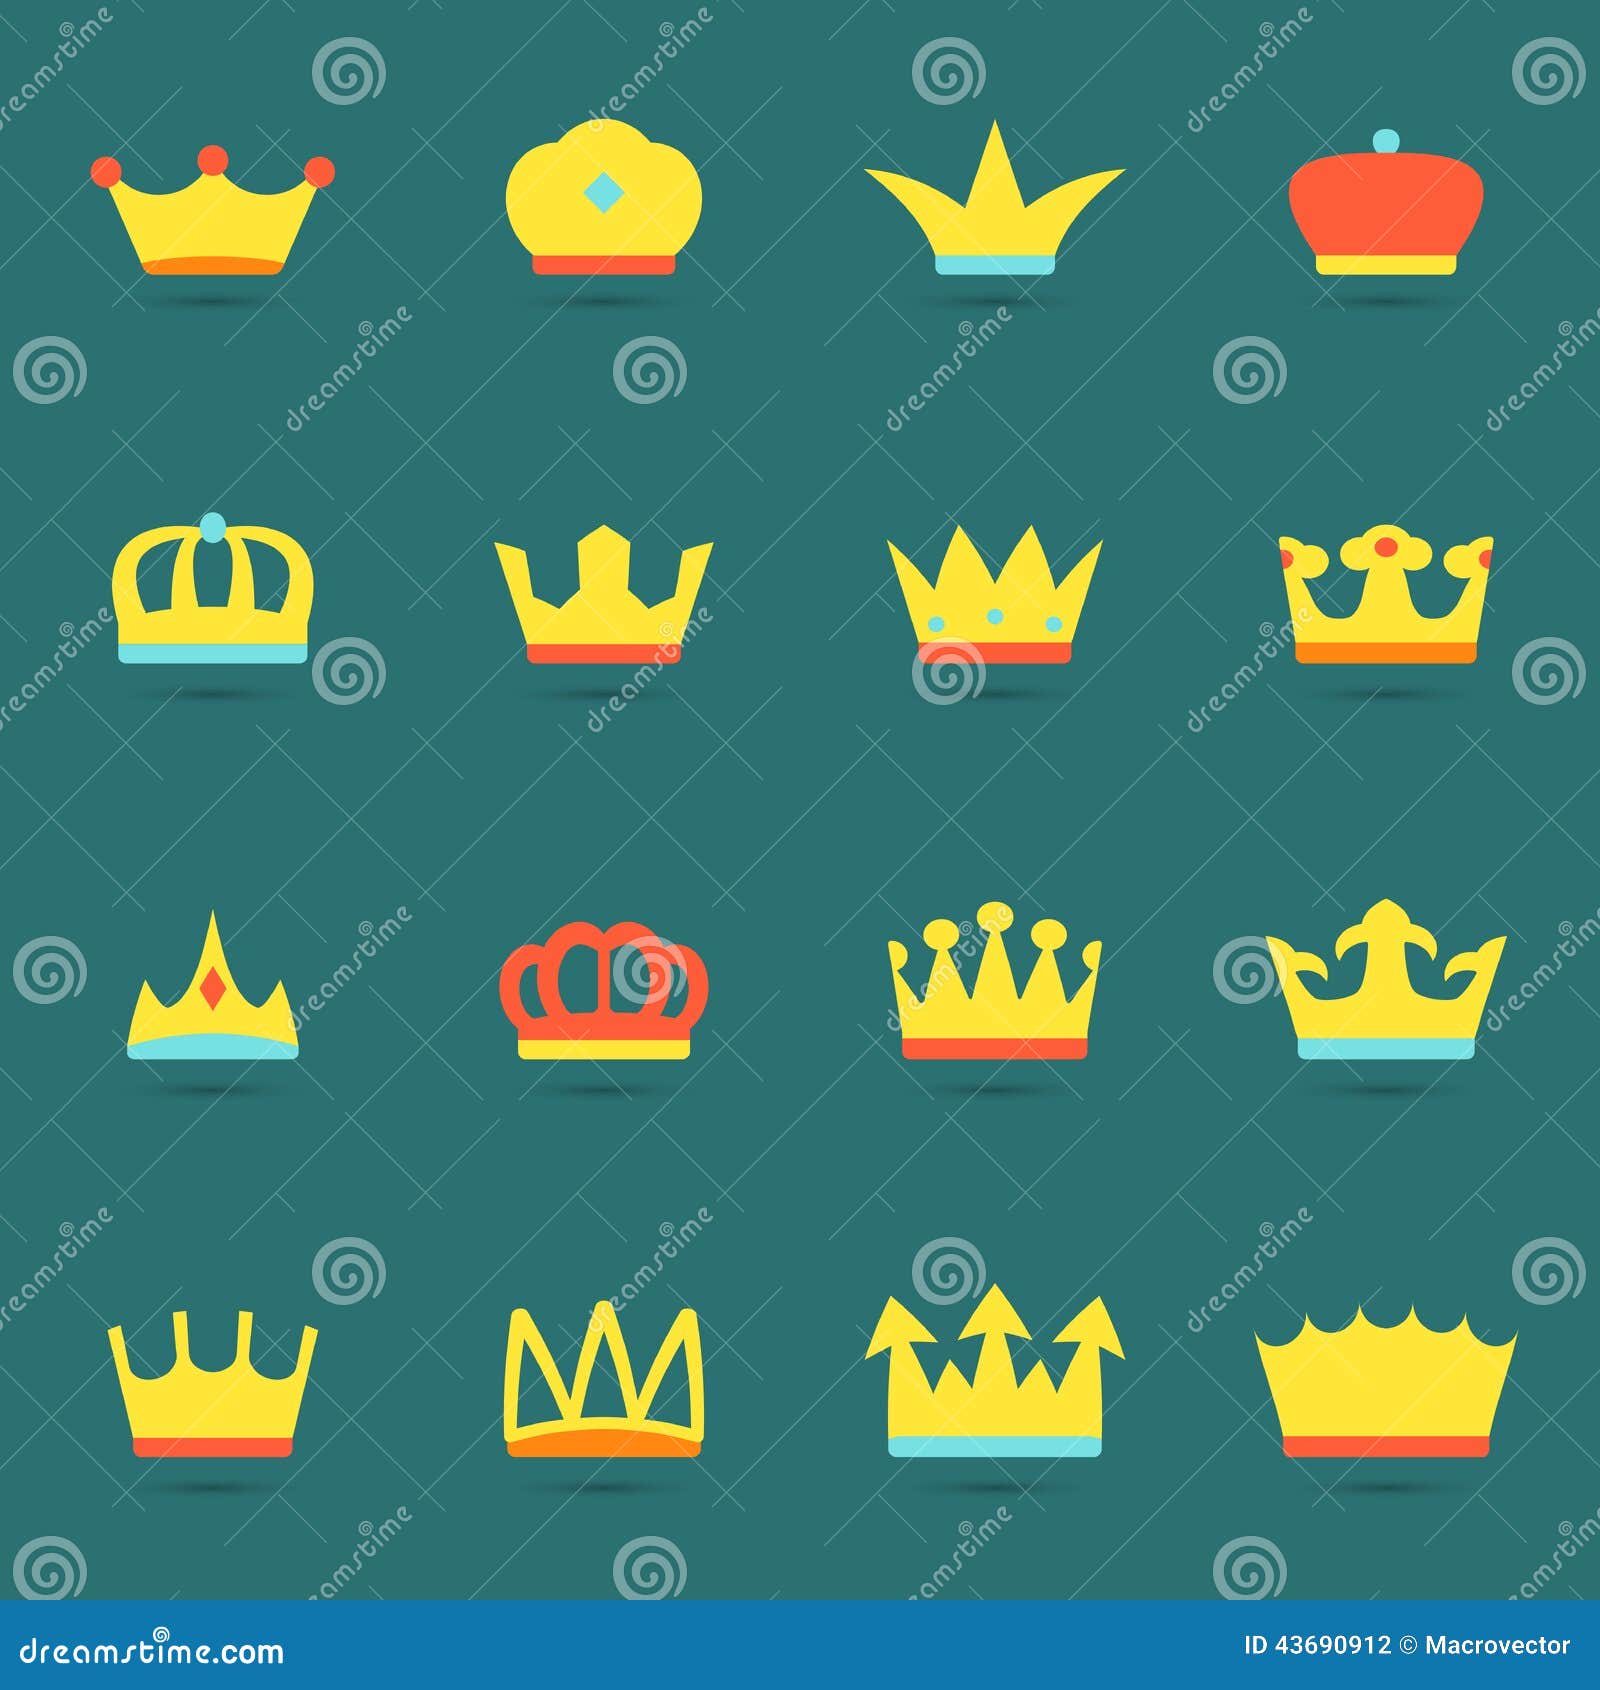 Crown icon set stock vector. Illustration of network - 43690912